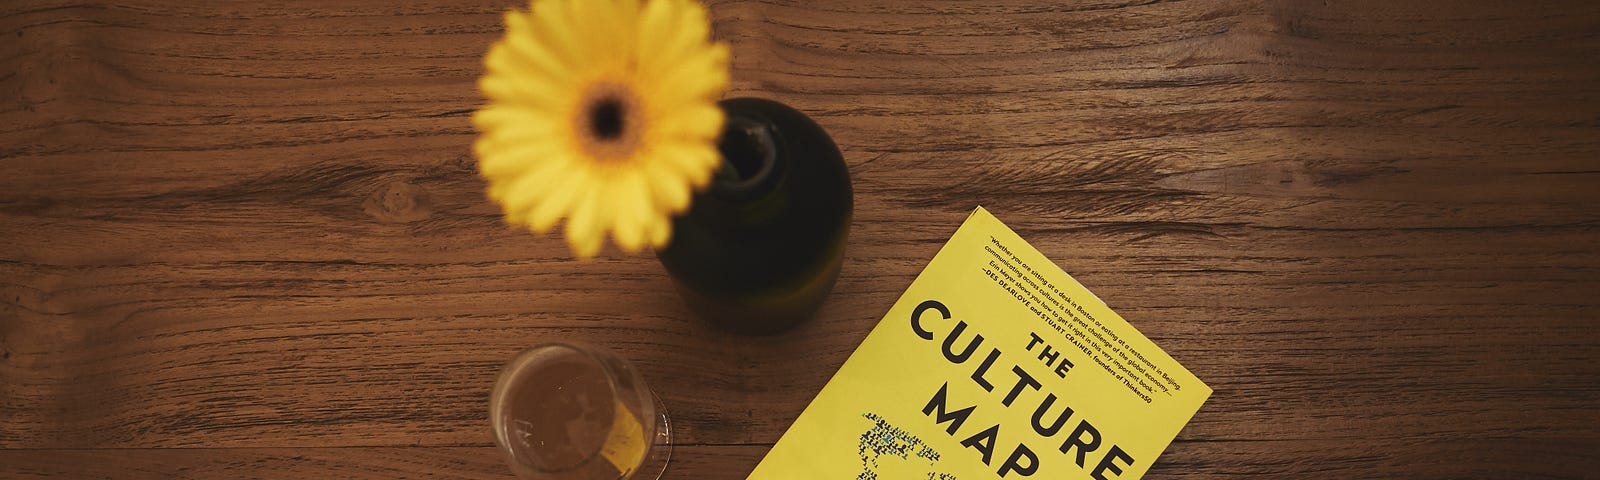 A yellow daisy in vase next to white wine glass and yellow book titled, “The Culture Map” by Erin Meyer on a brown table.